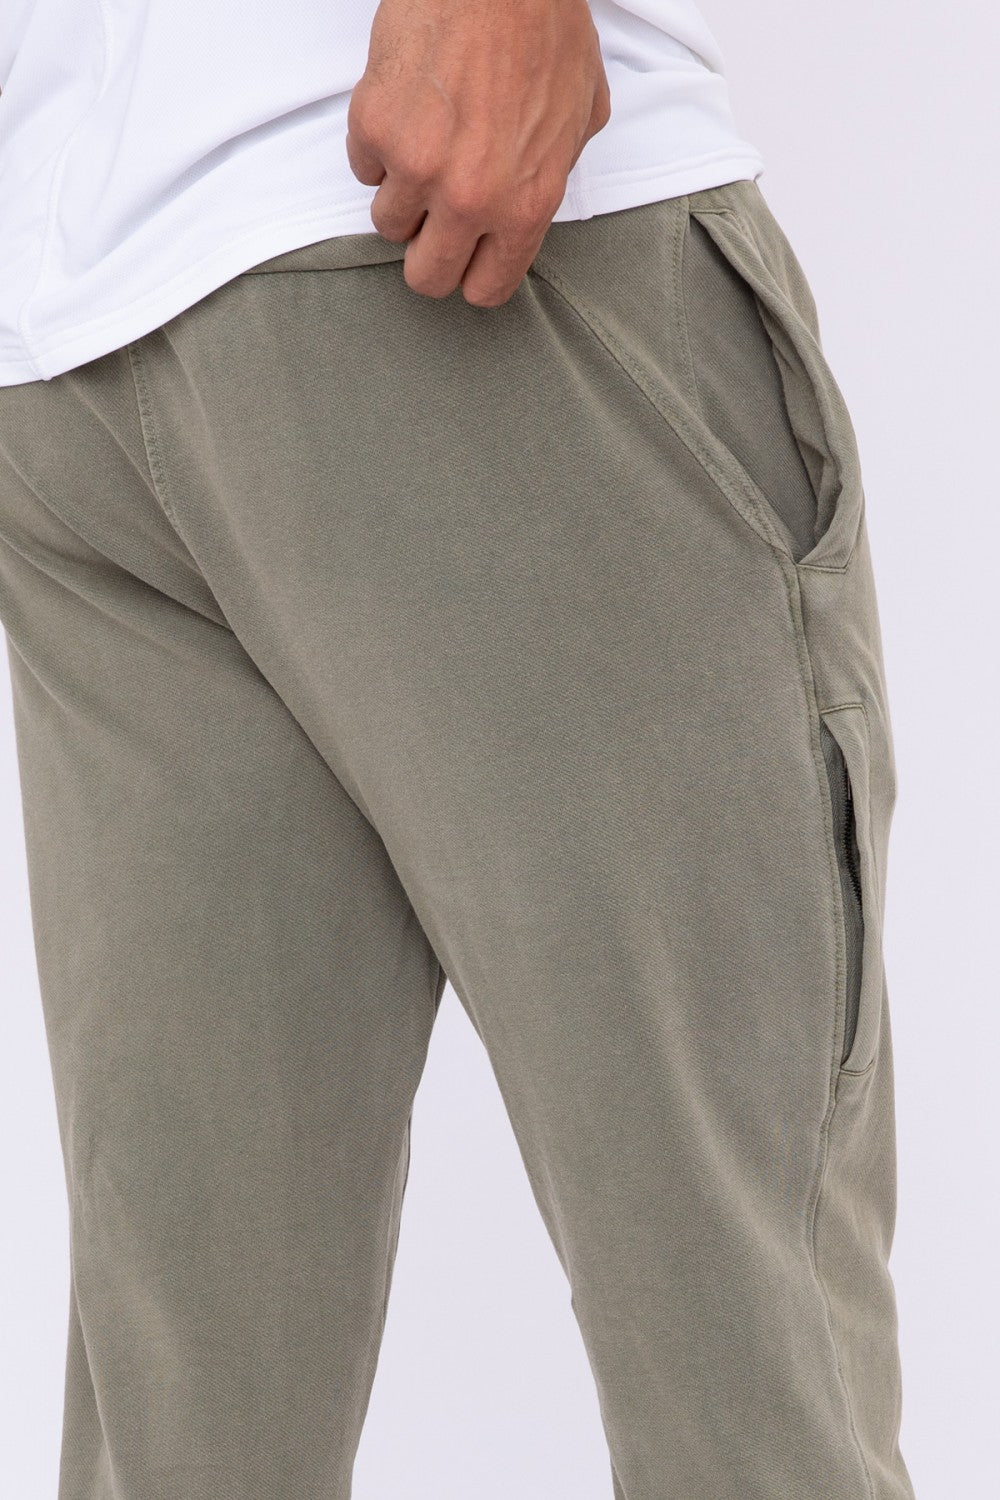 Men's Olive Twill Joggers With Hidden Zip pocket – CLOTHES FOR COMFORT